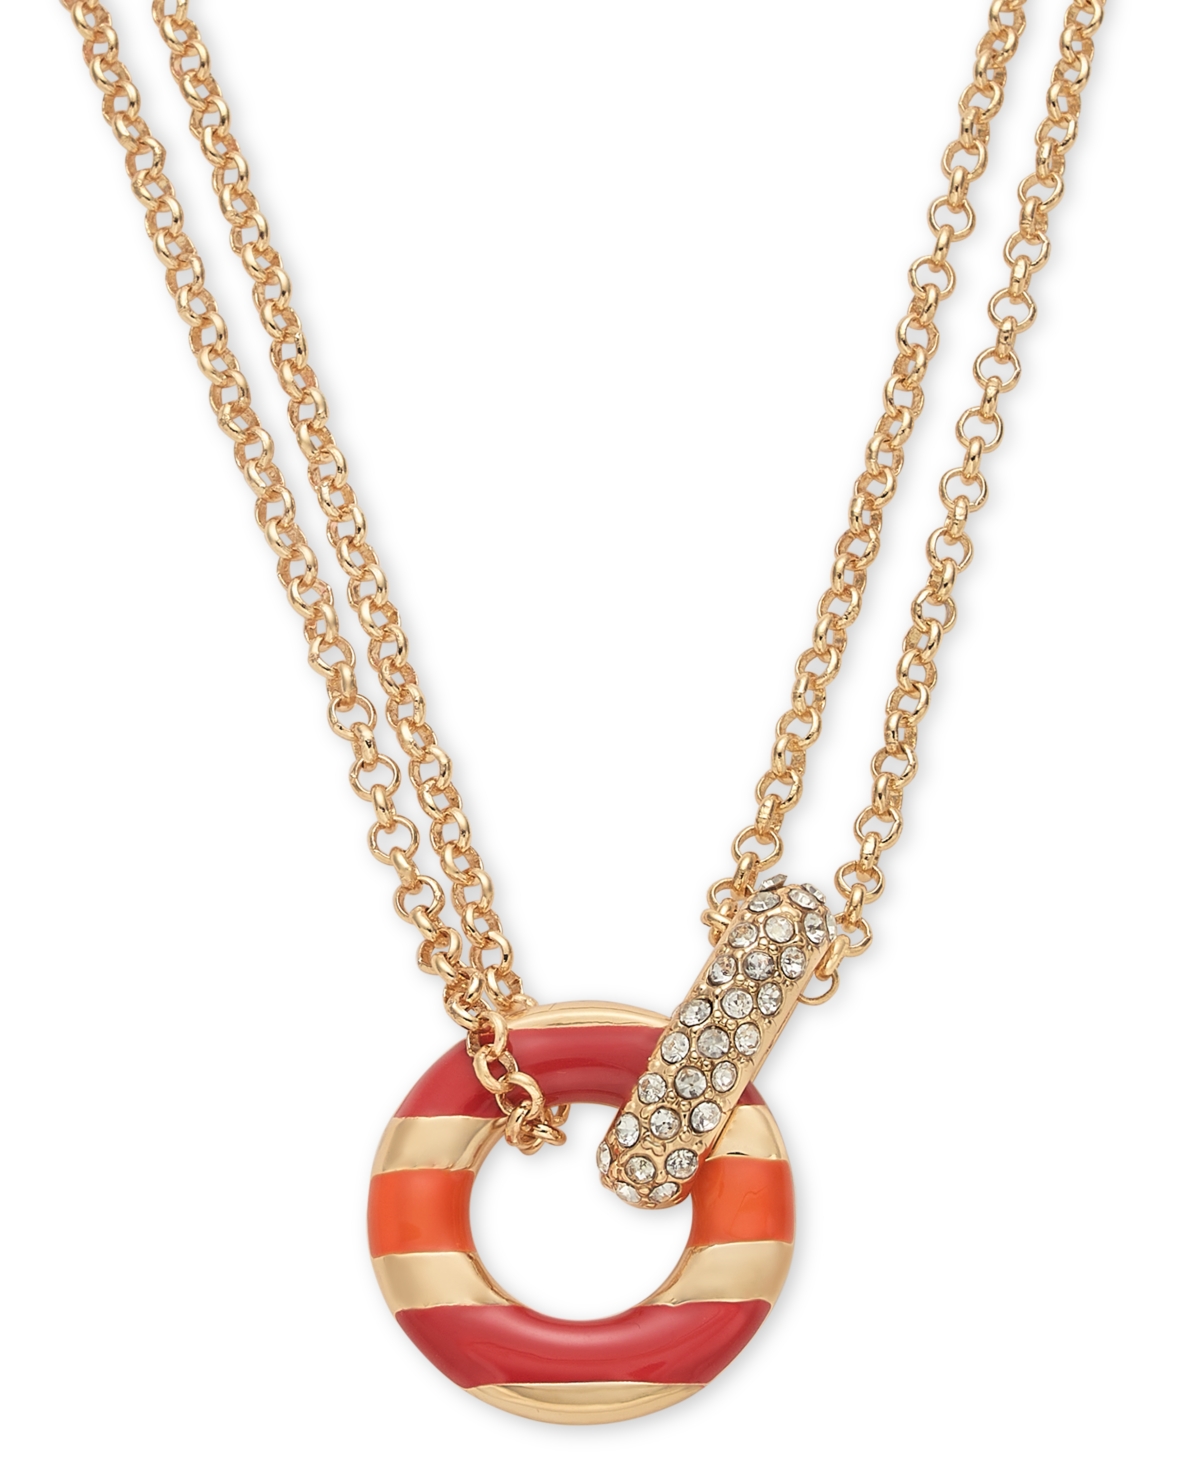 Gold-Tone Pave & Color Circle Double Chain Pendant Necklace, 16" + 2" extender, Created for Macy's - Blue